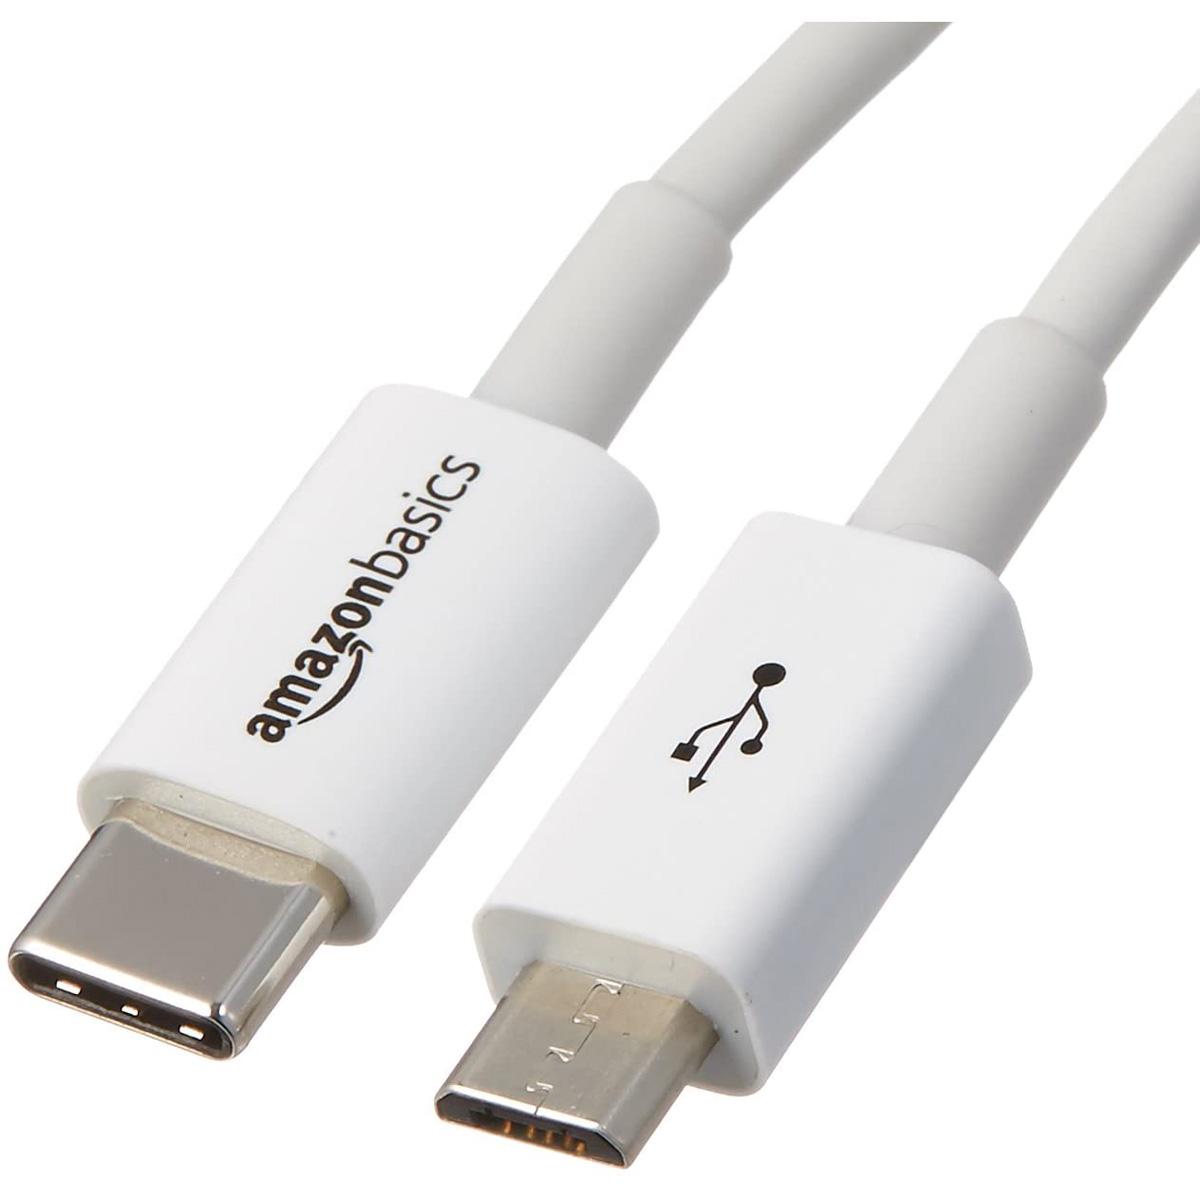 5 Amazon Basics USB Type-C to Micro USB Cables for $6.16